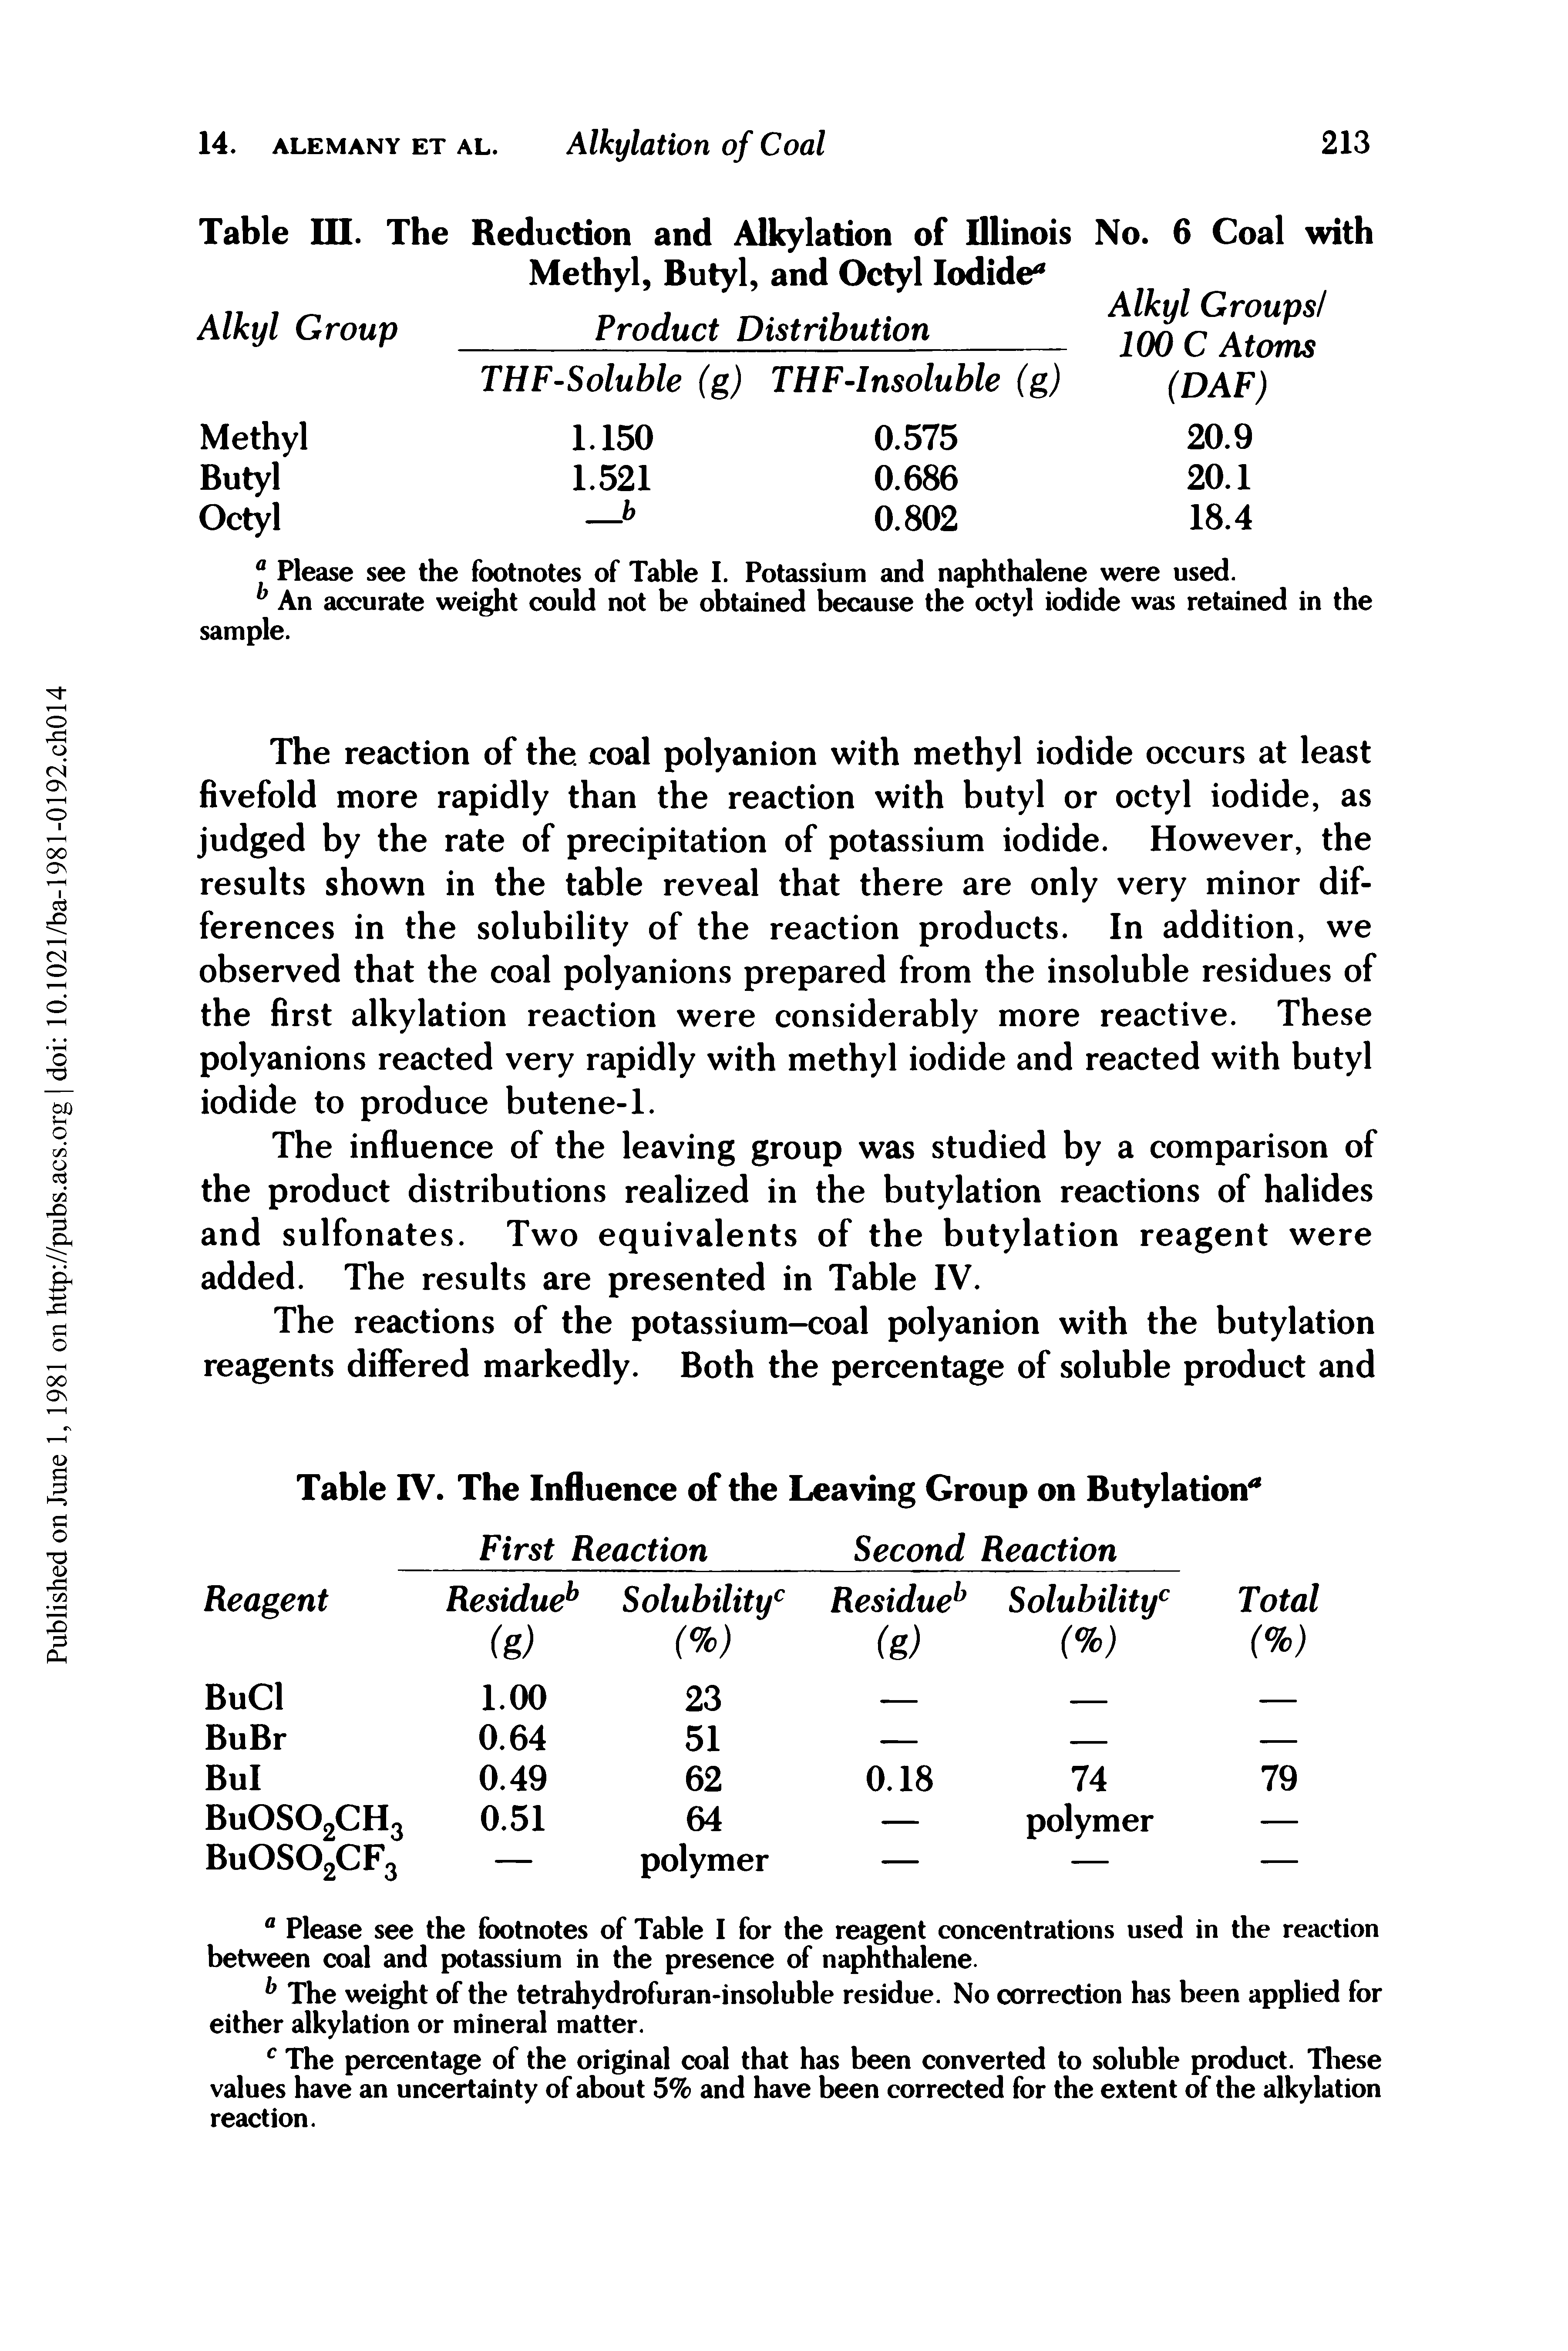 Table III. The Reduction and Alkylation of Illinois No. 6 Coal with Methyl, Butyl, and Octyl Iodide ...